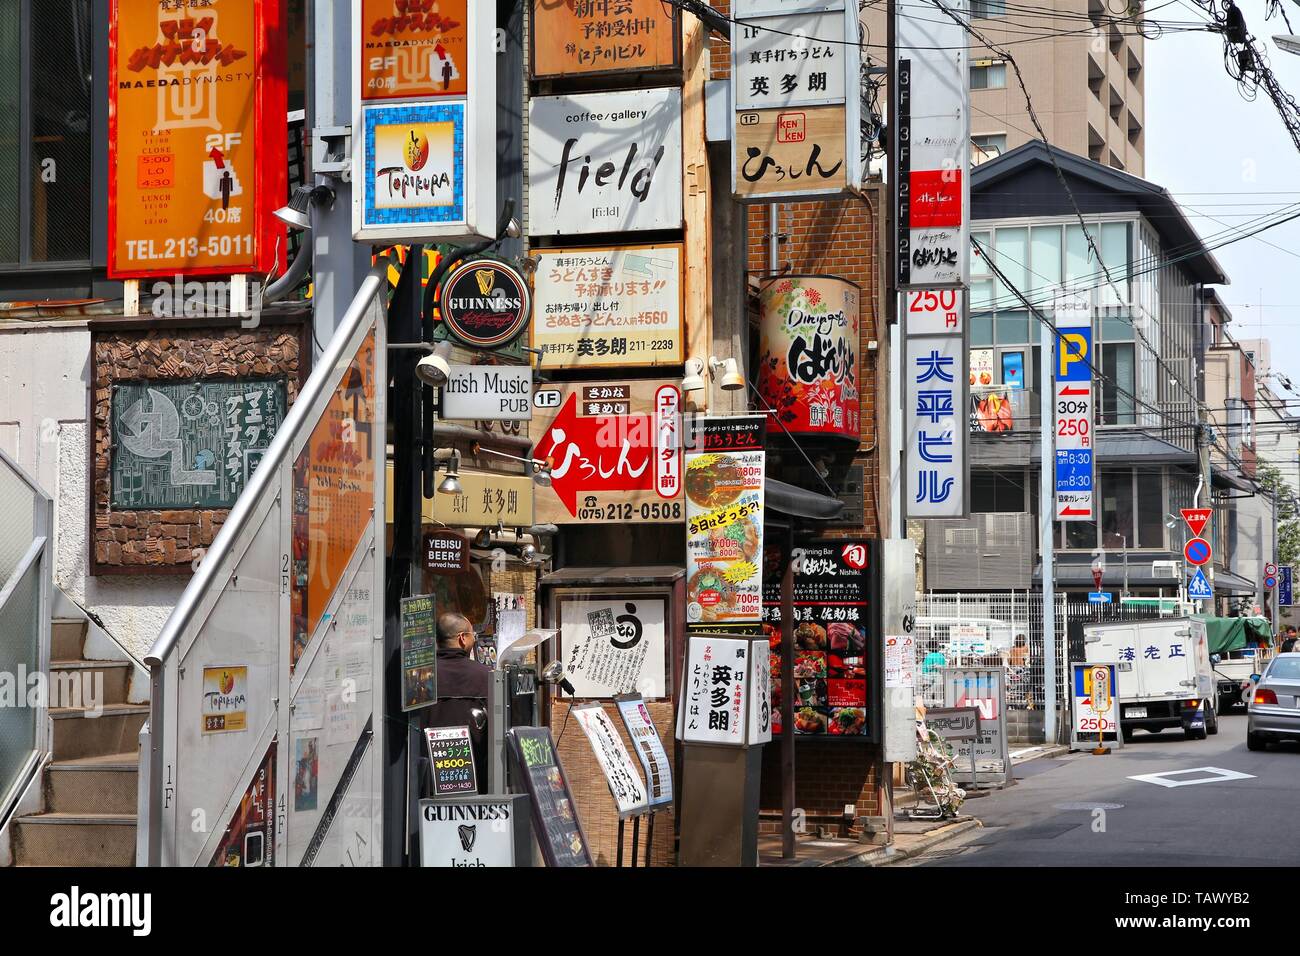 KYOTO, JAPAN - APRIL 19, 2012: Advertisements in downtown Kyoto, Japan. Kyoto is the former imperial capital of Japan, now it's a major city with 1.5  Stock Photo